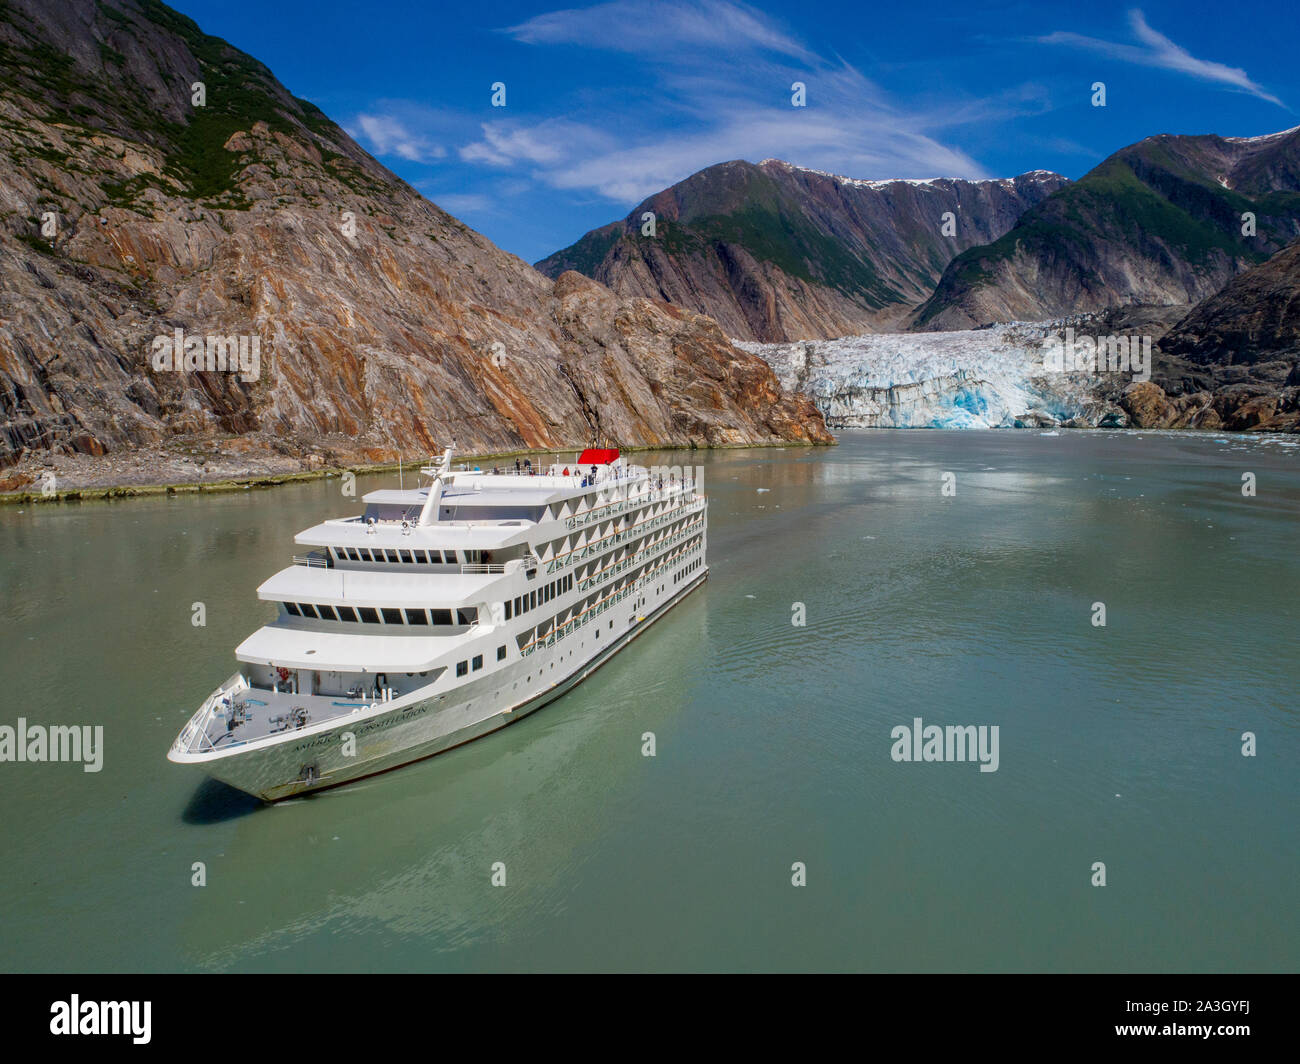 USA, Alaska, Tracy Arm - Fords Terror Wilderness, Aerial view of cruise ship M/S American Constitution motoring near Sawyer Glacier in Tracy Arm on su Stock Photo